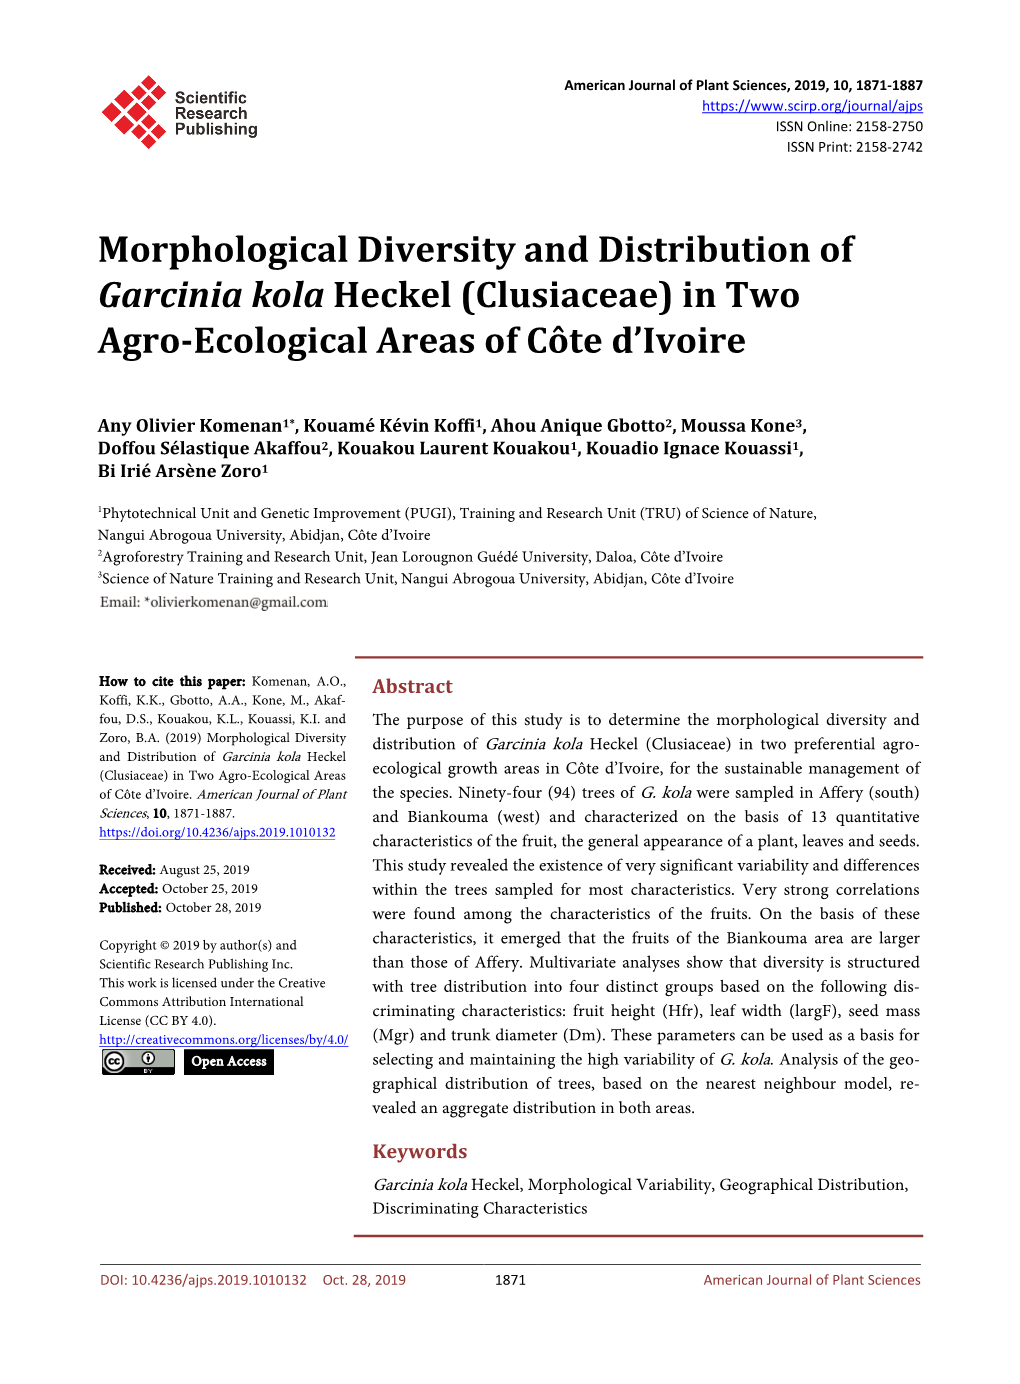 Morphological Diversity and Distribution of Garcinia Kola Heckel (Clusiaceae) in Two Agro-Ecological Areas of Côte D’Ivoire